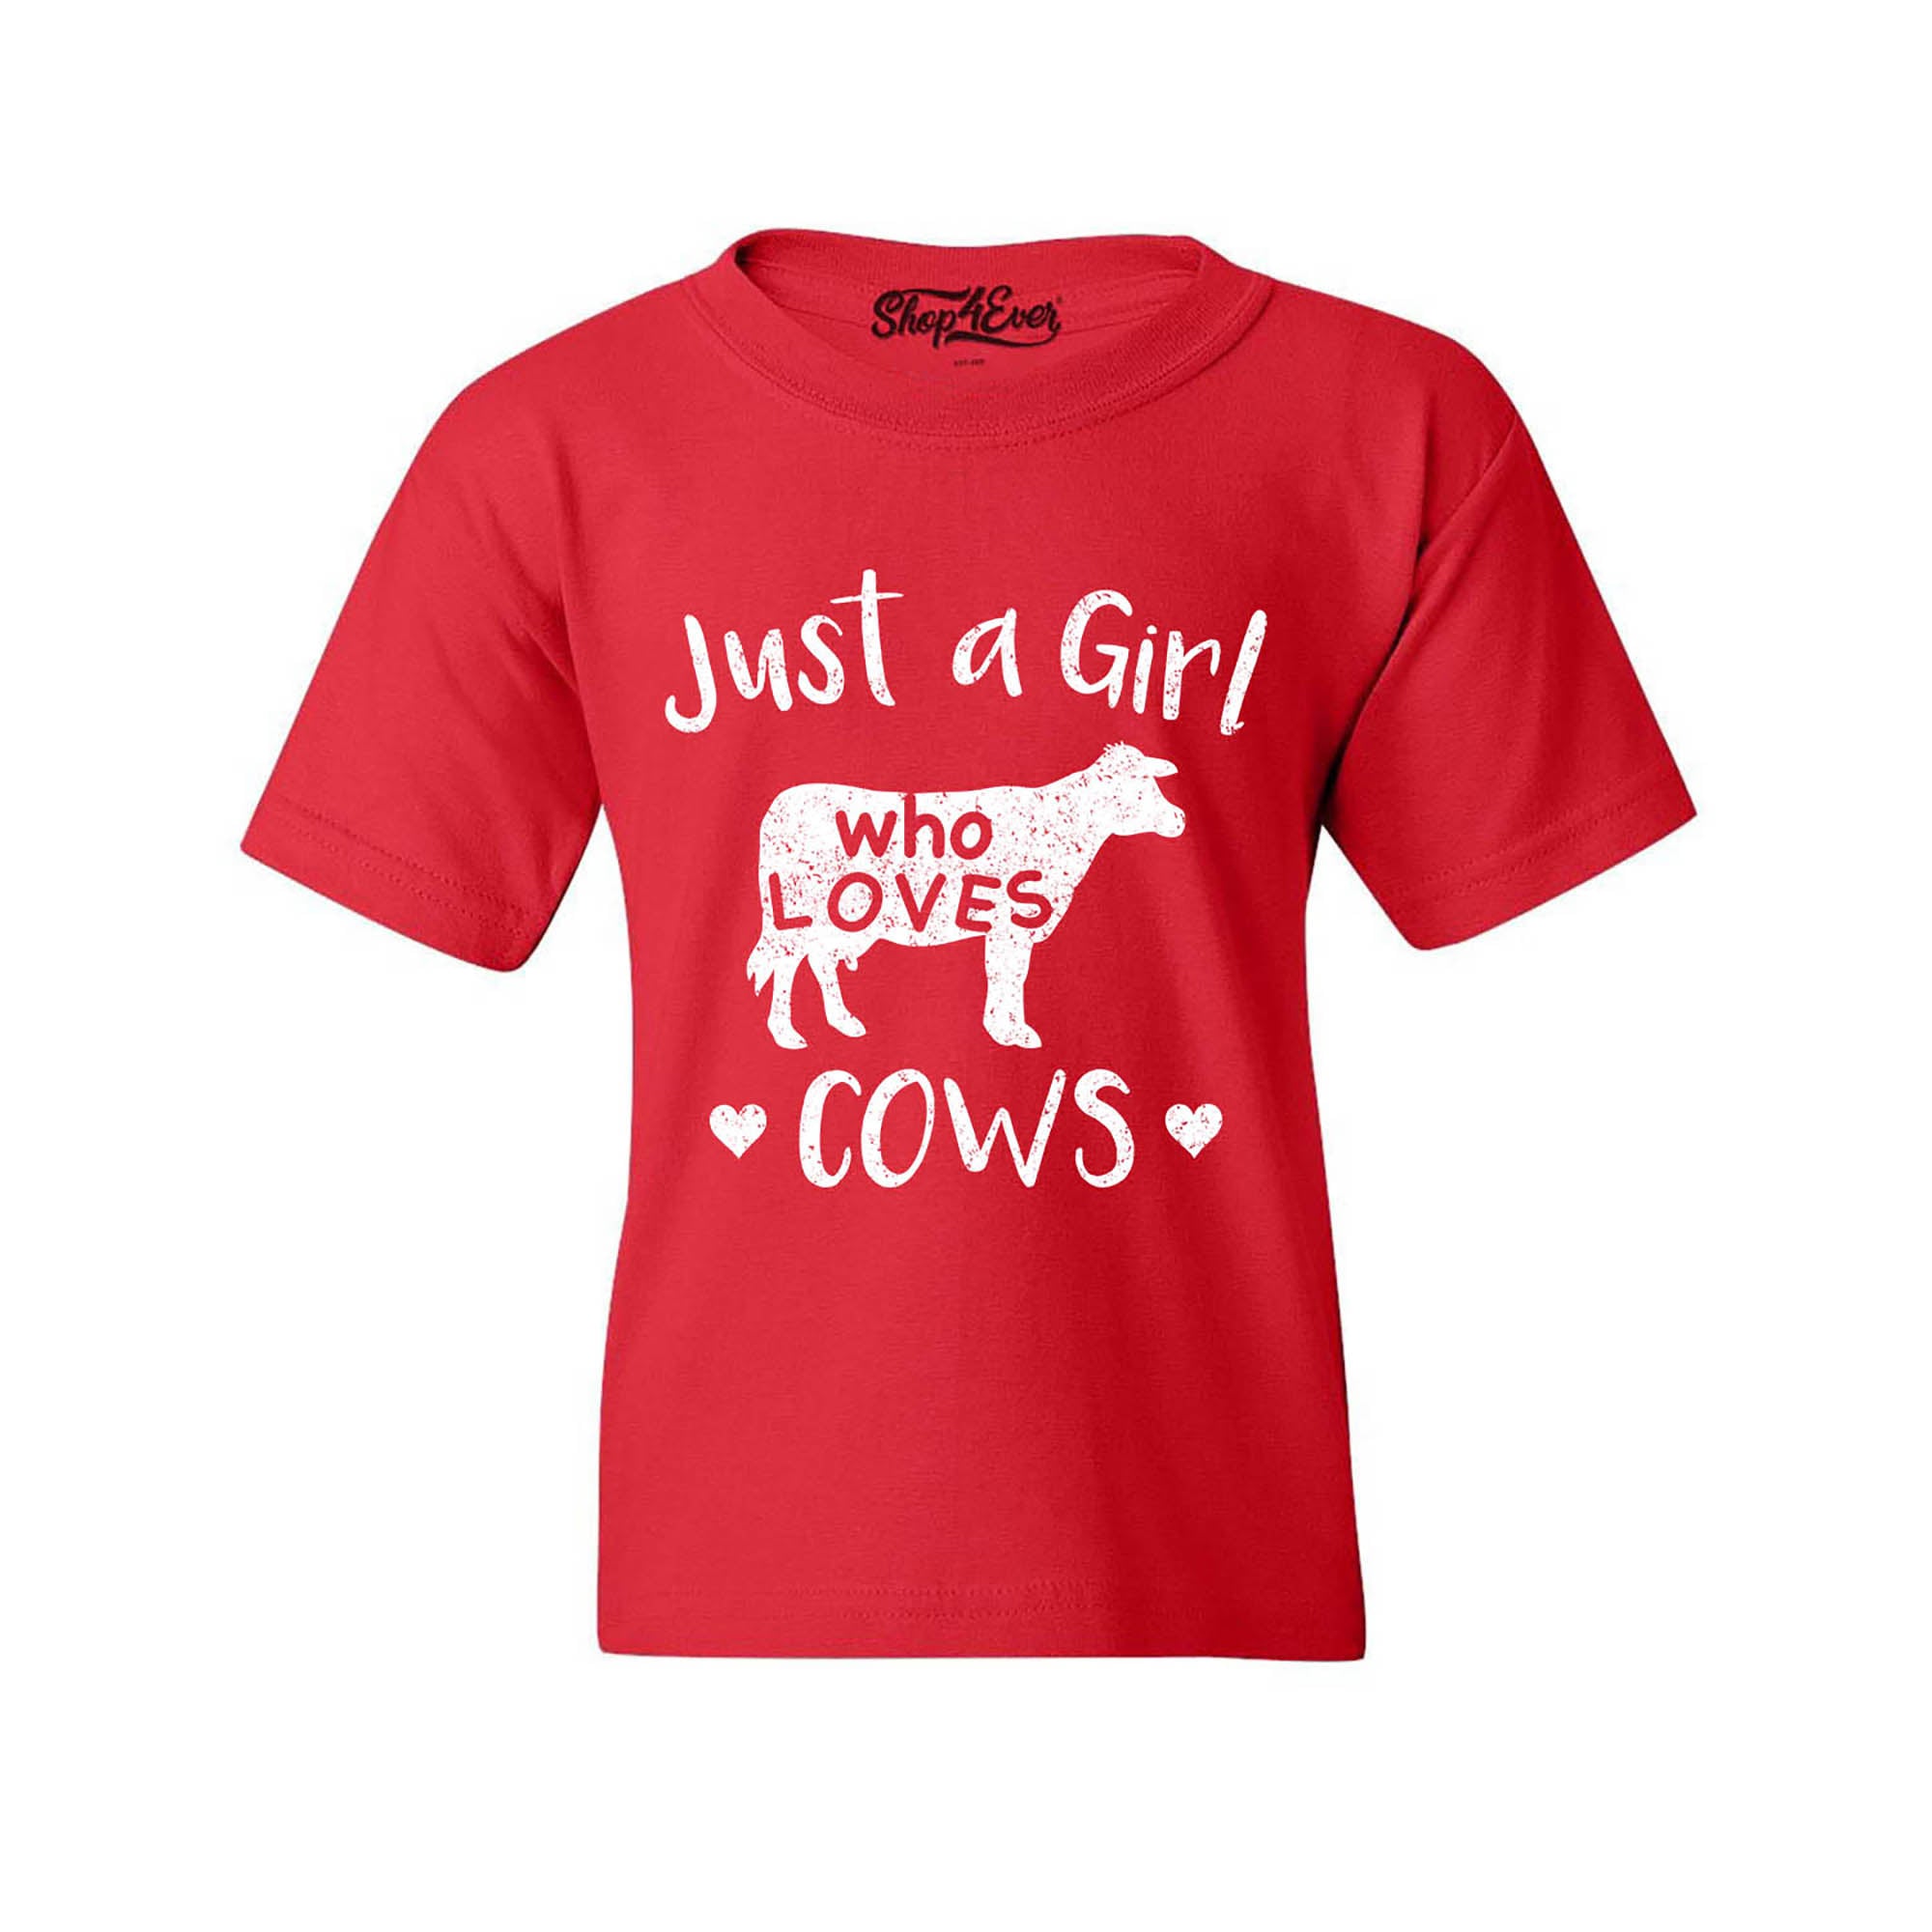 Just A Girl Who Loves Cows Youth's T-Shirt